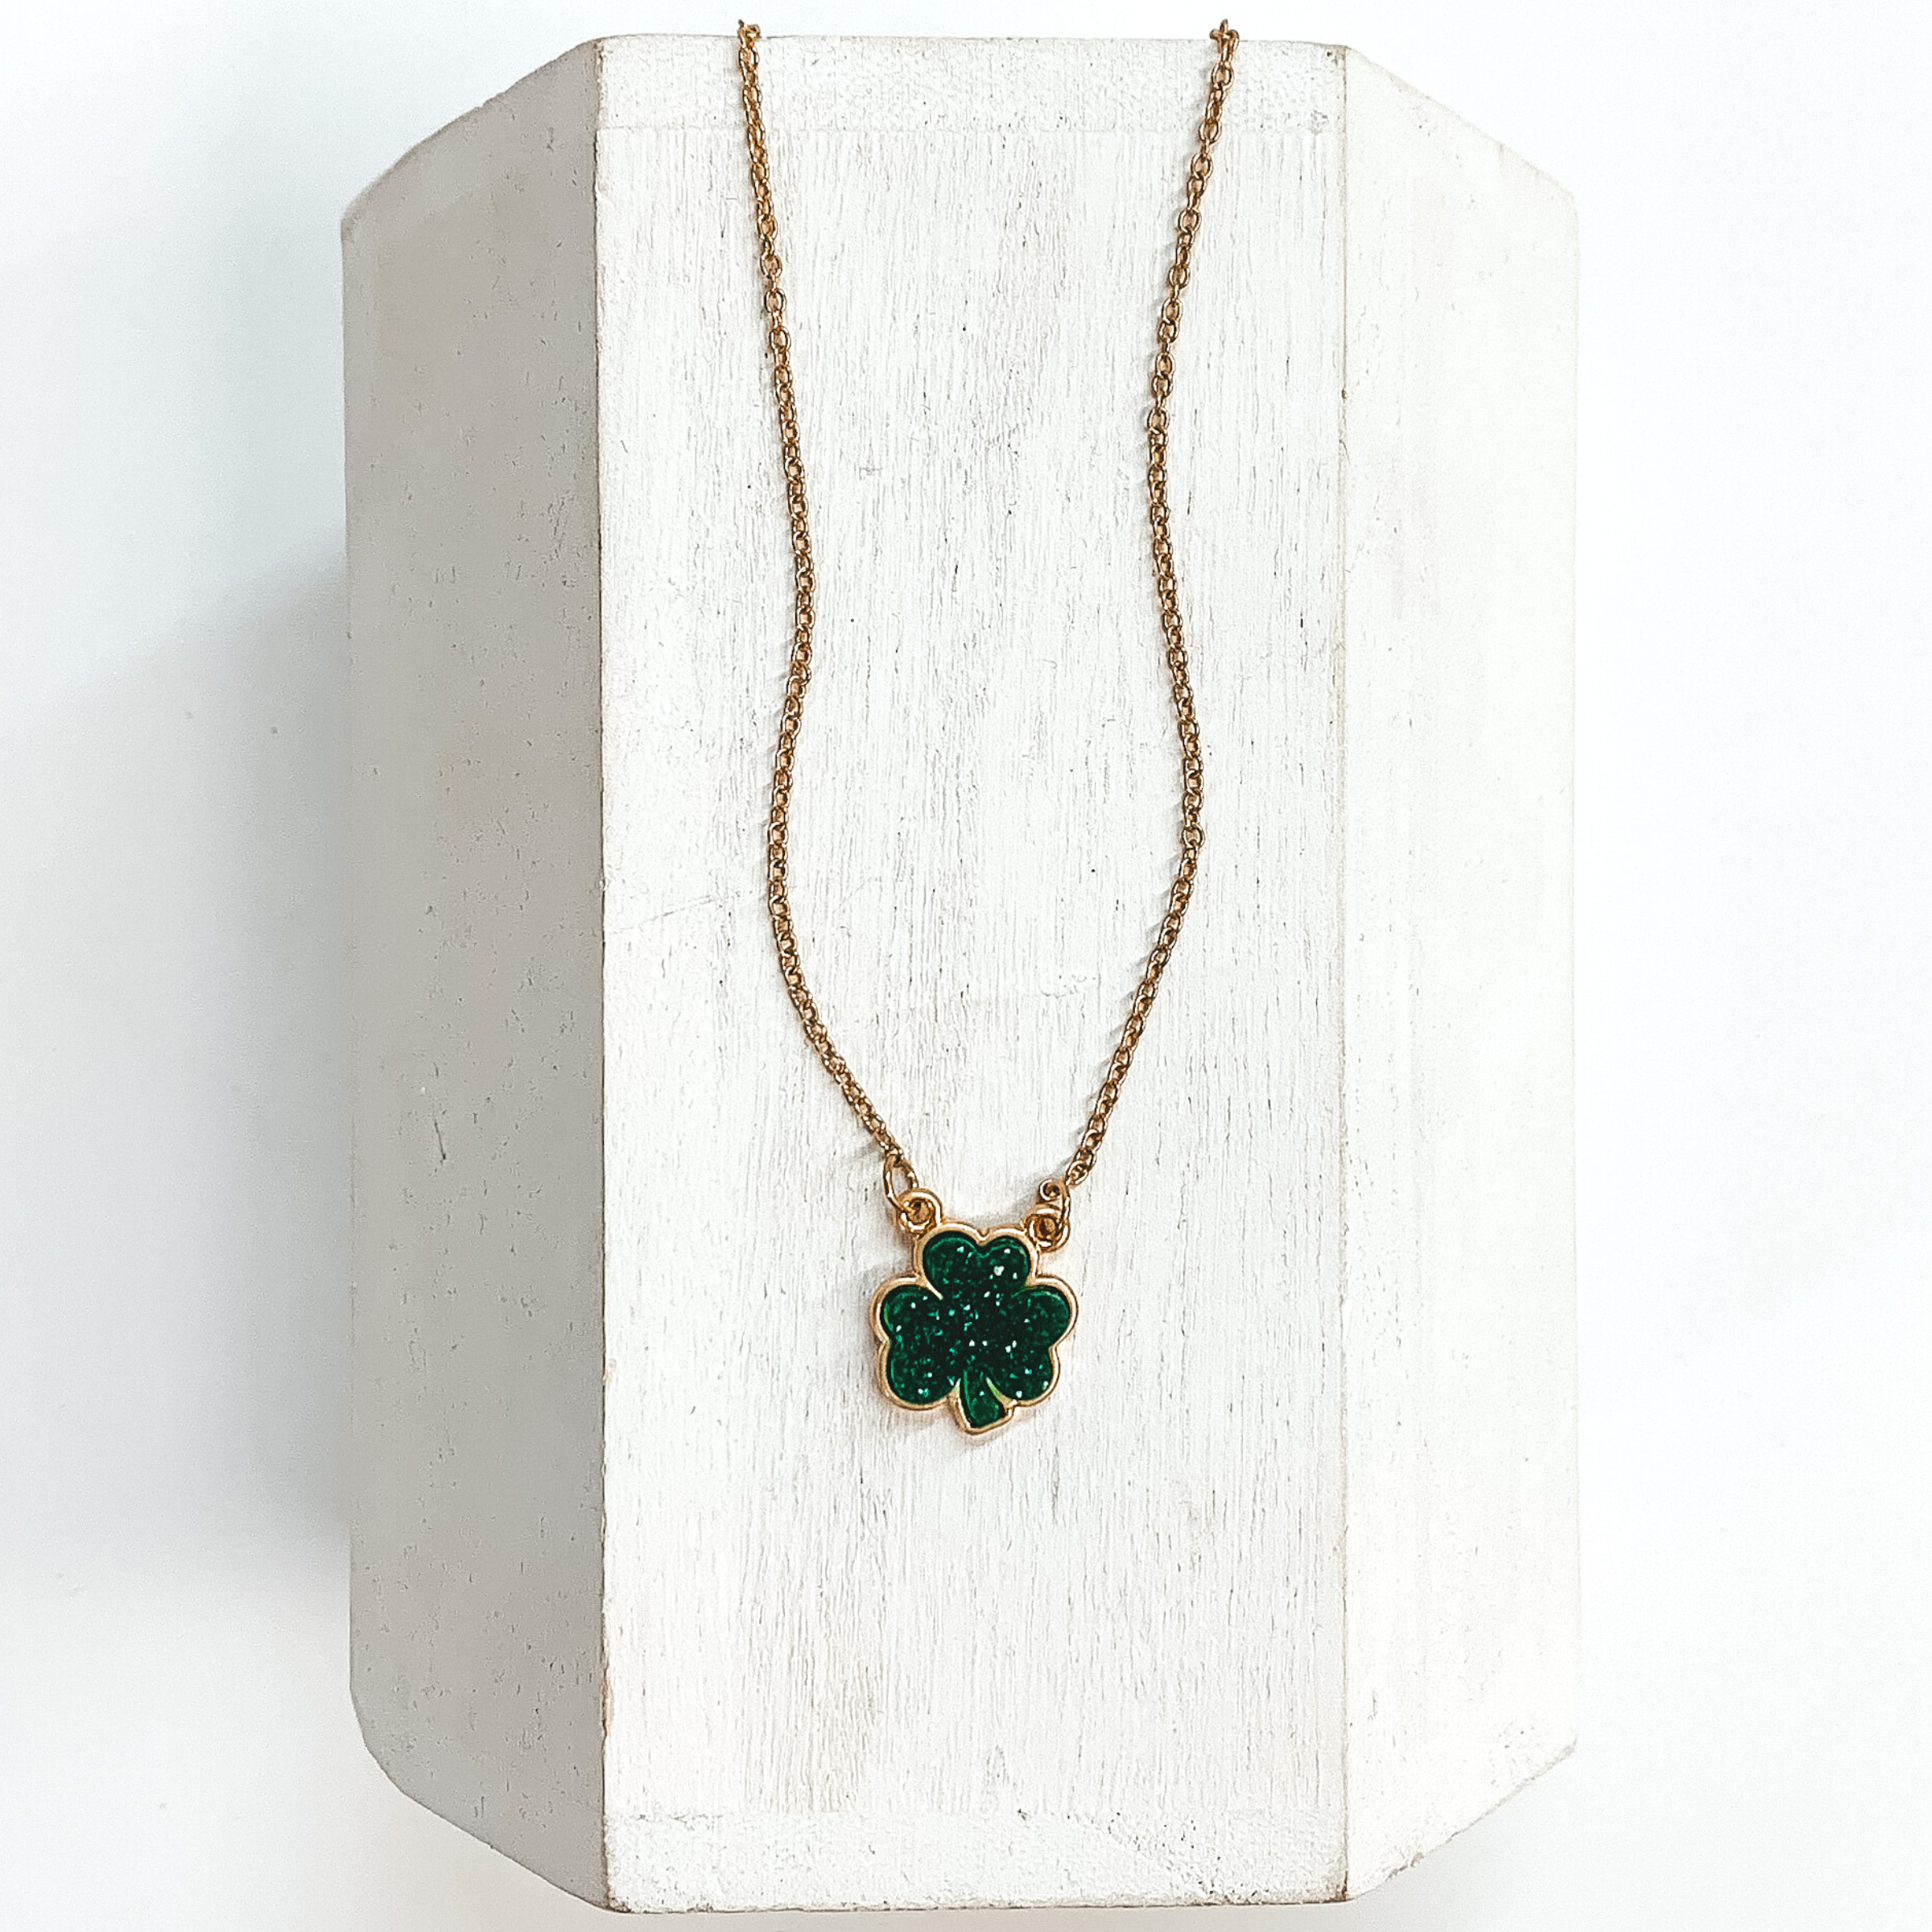 Gold chained necklace with green druzy four leaf clover pendant. This necklace is pictured laying on a white block on a white background.